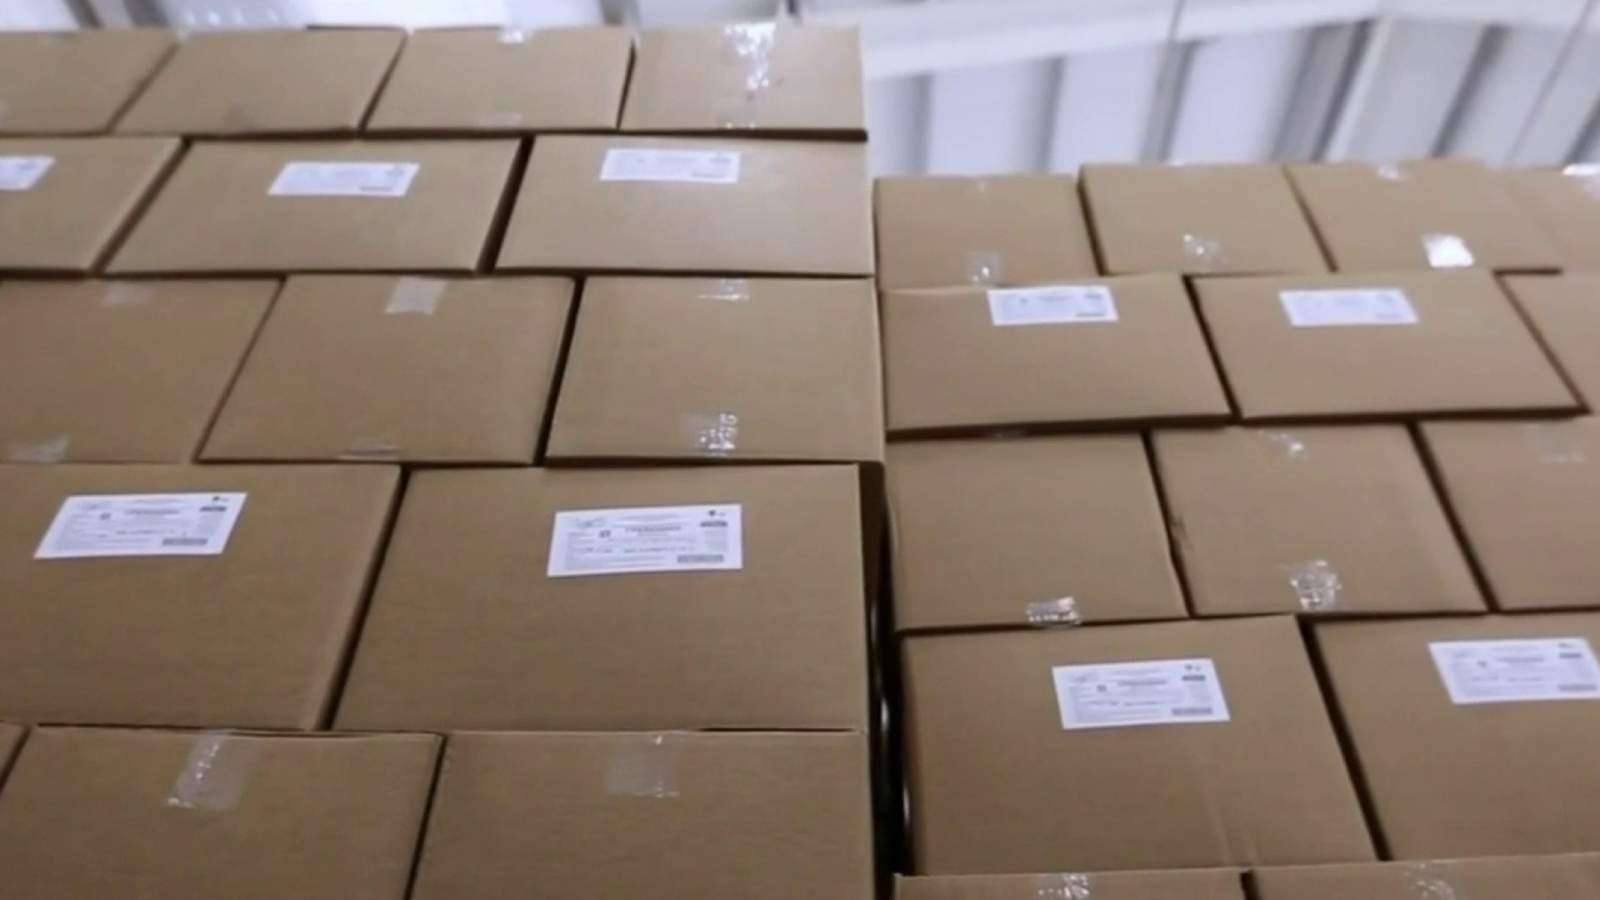 Holiday shipping: Here are dates to ensure your packages arrive in time